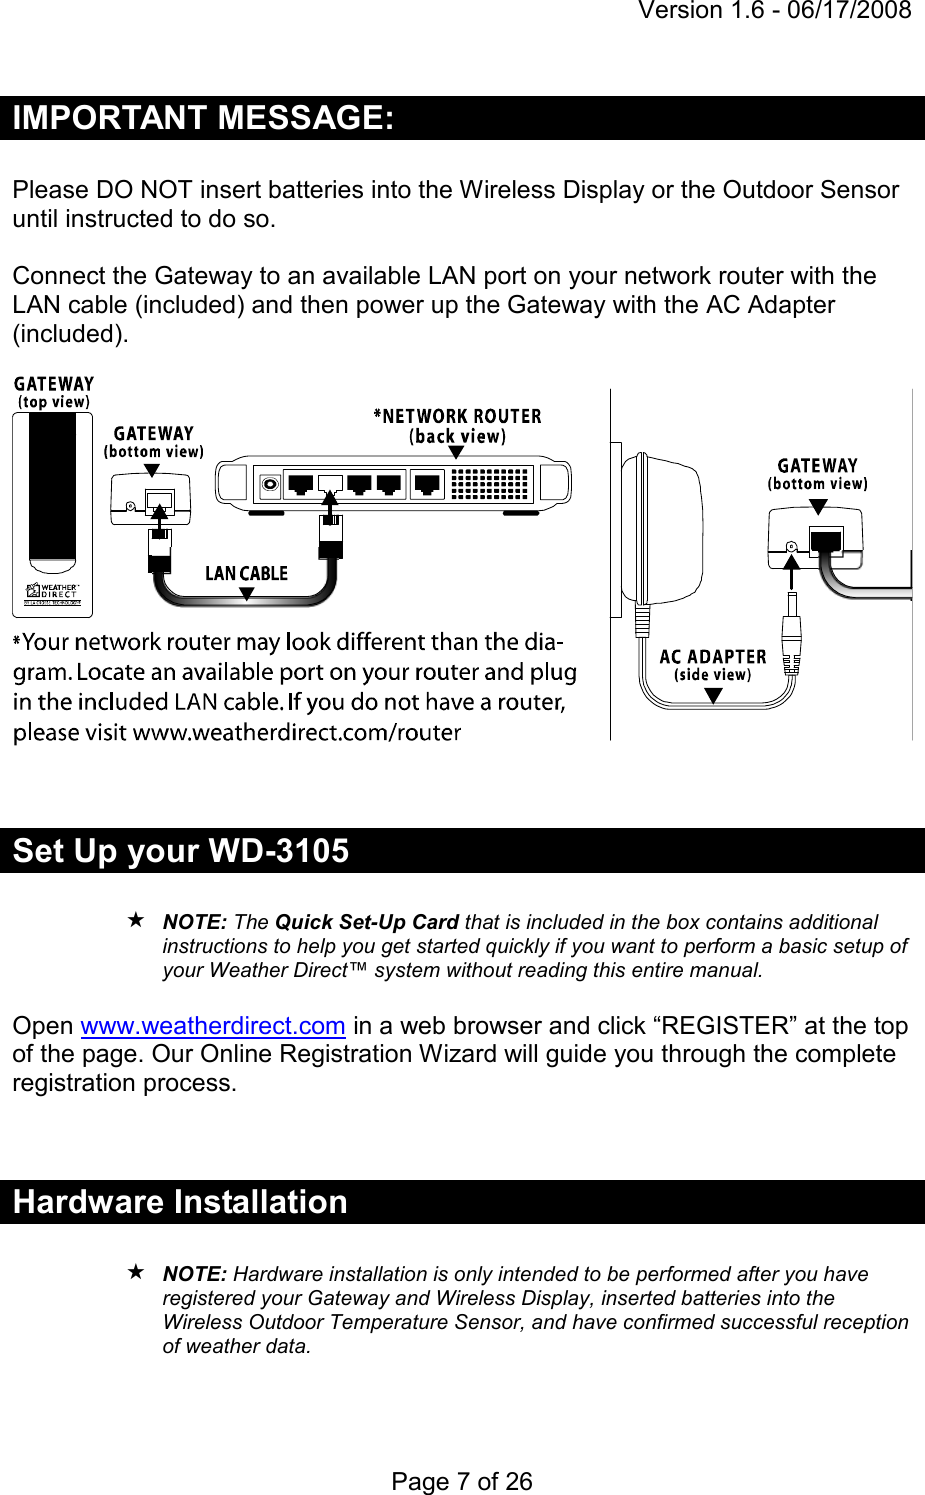 Version 1.6 - 06/17/2008 Page 7 of 26 IMPORTANT MESSAGE:  Please DO NOT insert batteries into the Wireless Display or the Outdoor Sensor until instructed to do so.   Connect the Gateway to an available LAN port on your network router with the LAN cable (included) and then power up the Gateway with the AC Adapter (included).     Set Up your WD-3105   NOTE: The Quick Set-Up Card that is included in the box contains additional instructions to help you get started quickly if you want to perform a basic setup of your Weather Direct™ system without reading this entire manual.  Open www.weatherdirect.com in a web browser and click “REGISTER” at the top of the page. Our Online Registration Wizard will guide you through the complete registration process.   Hardware Installation   NOTE: Hardware installation is only intended to be performed after you have registered your Gateway and Wireless Display, inserted batteries into the Wireless Outdoor Temperature Sensor, and have confirmed successful reception of weather data.    